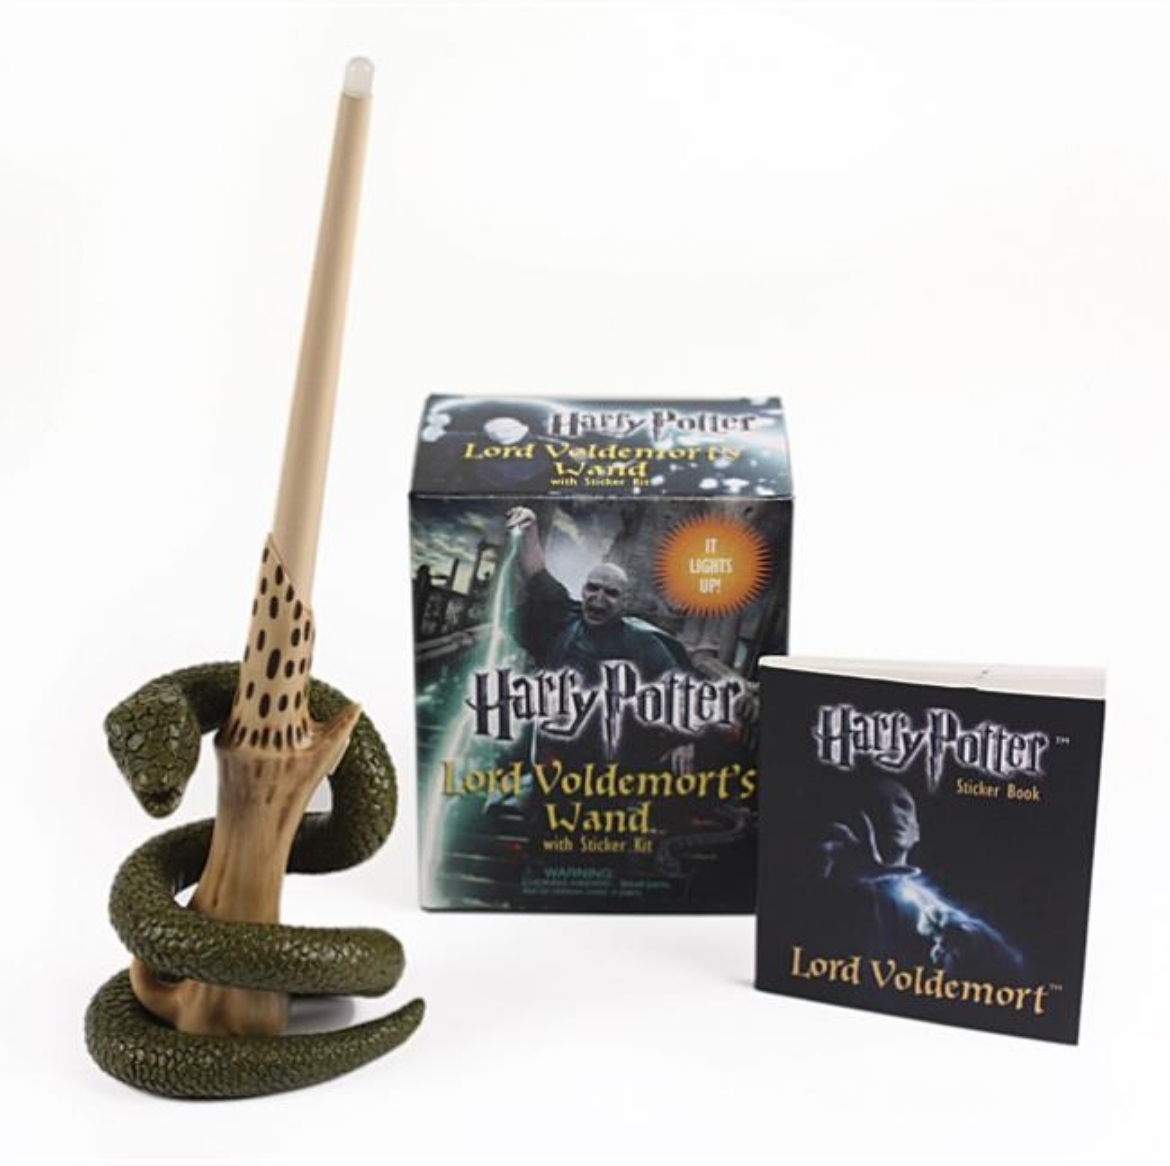 Picture of Harry potter voldemorts wand with sticker kit - lights up!